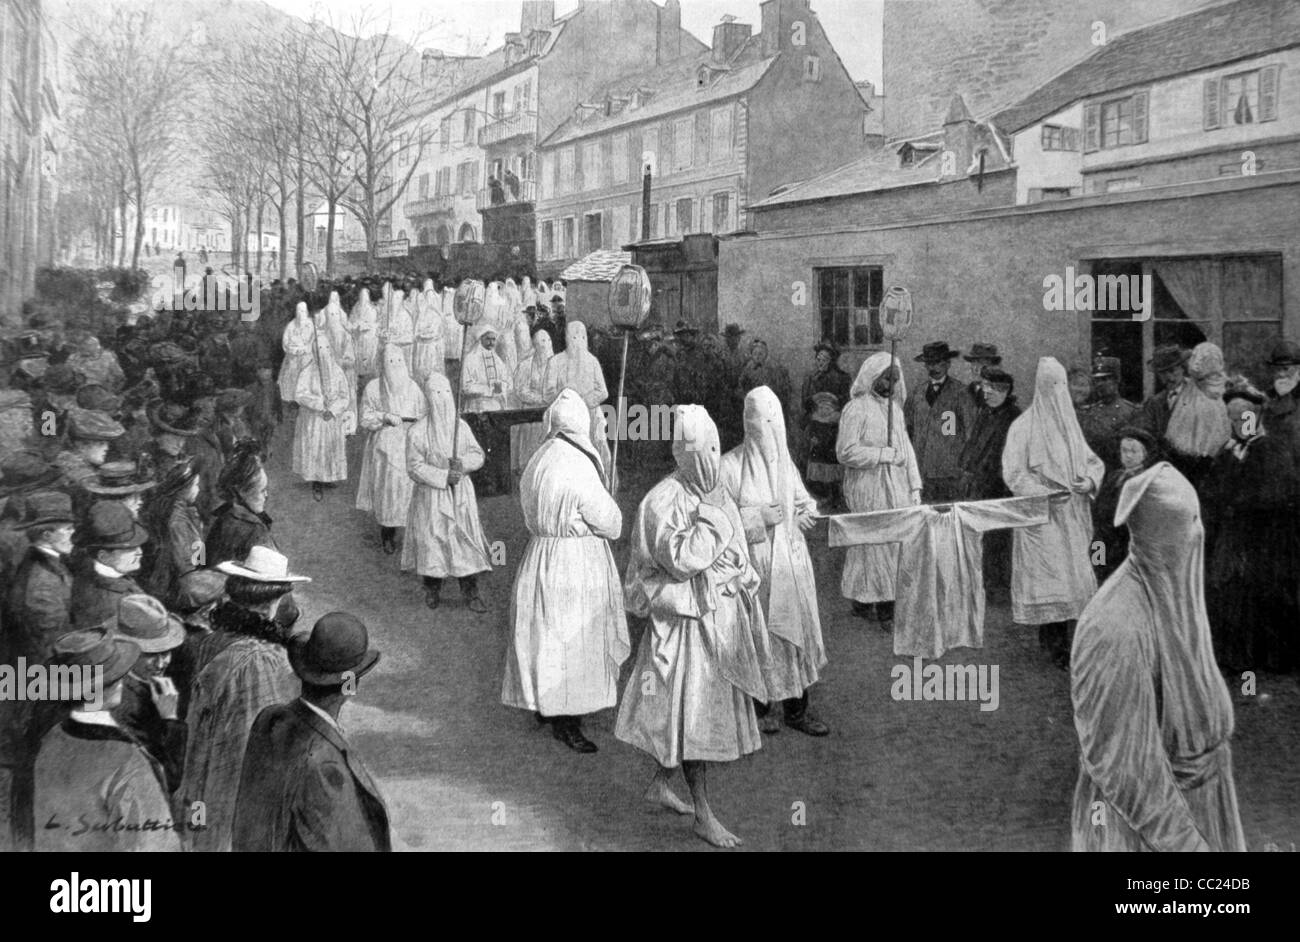 Easter Procession of White Penitents Dressed in White Cloaks or White Habits, Good Friday, Mende, Lozère, central France, 1904. Vintage Illustration Stock Photo